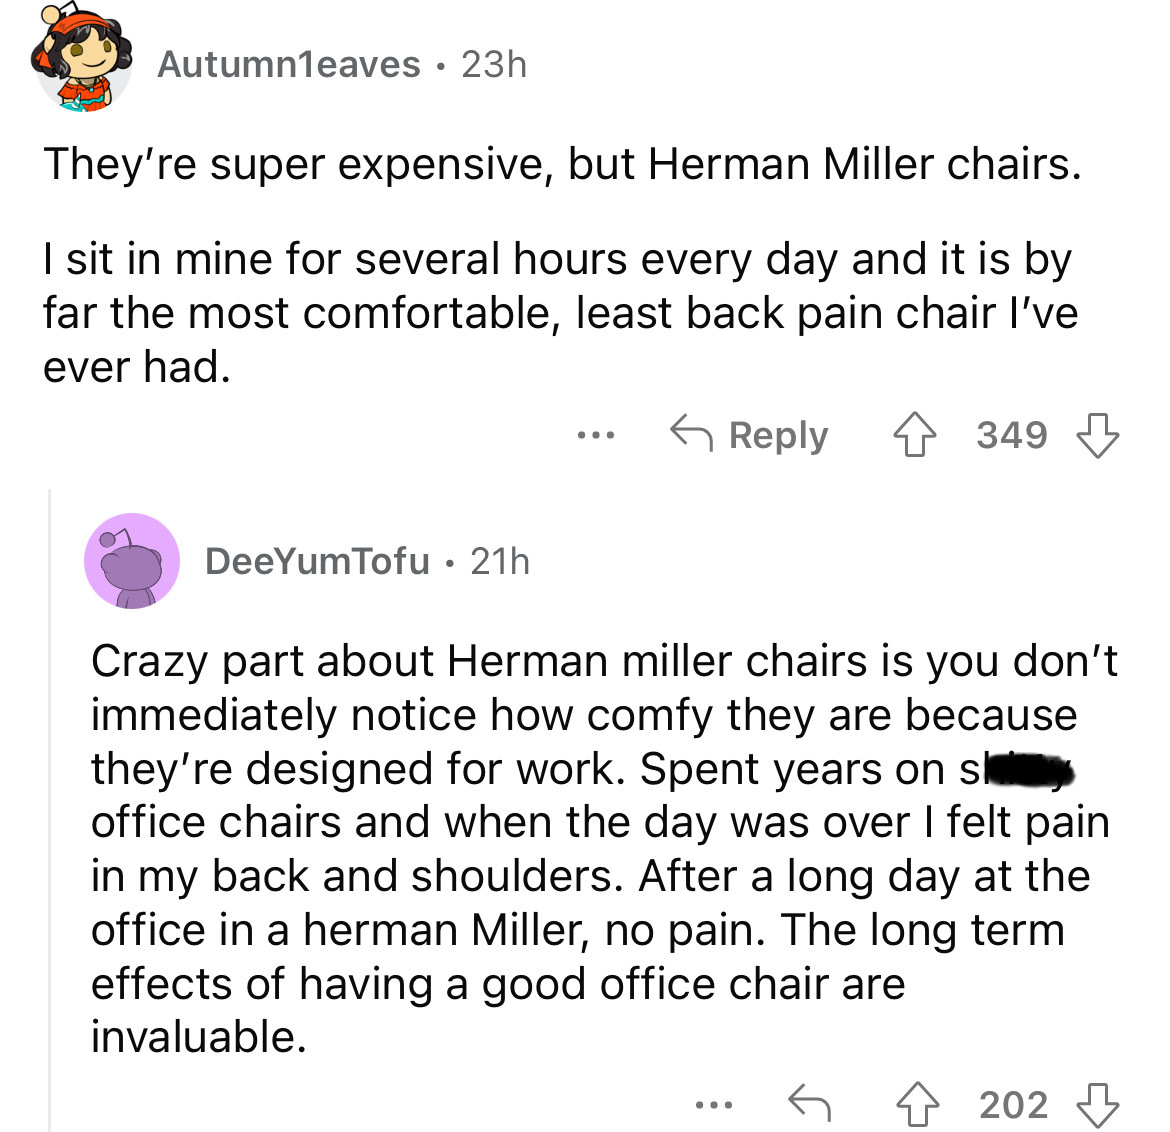 angle - Autumn1eaves 23h They're super expensive, but Herman Miller chairs. I sit in mine for several hours every day and it is by far the most comfortable, least back pain chair I've ever had. 349 DeeYumTofu 21h Crazy part about Herman miller chairs is y